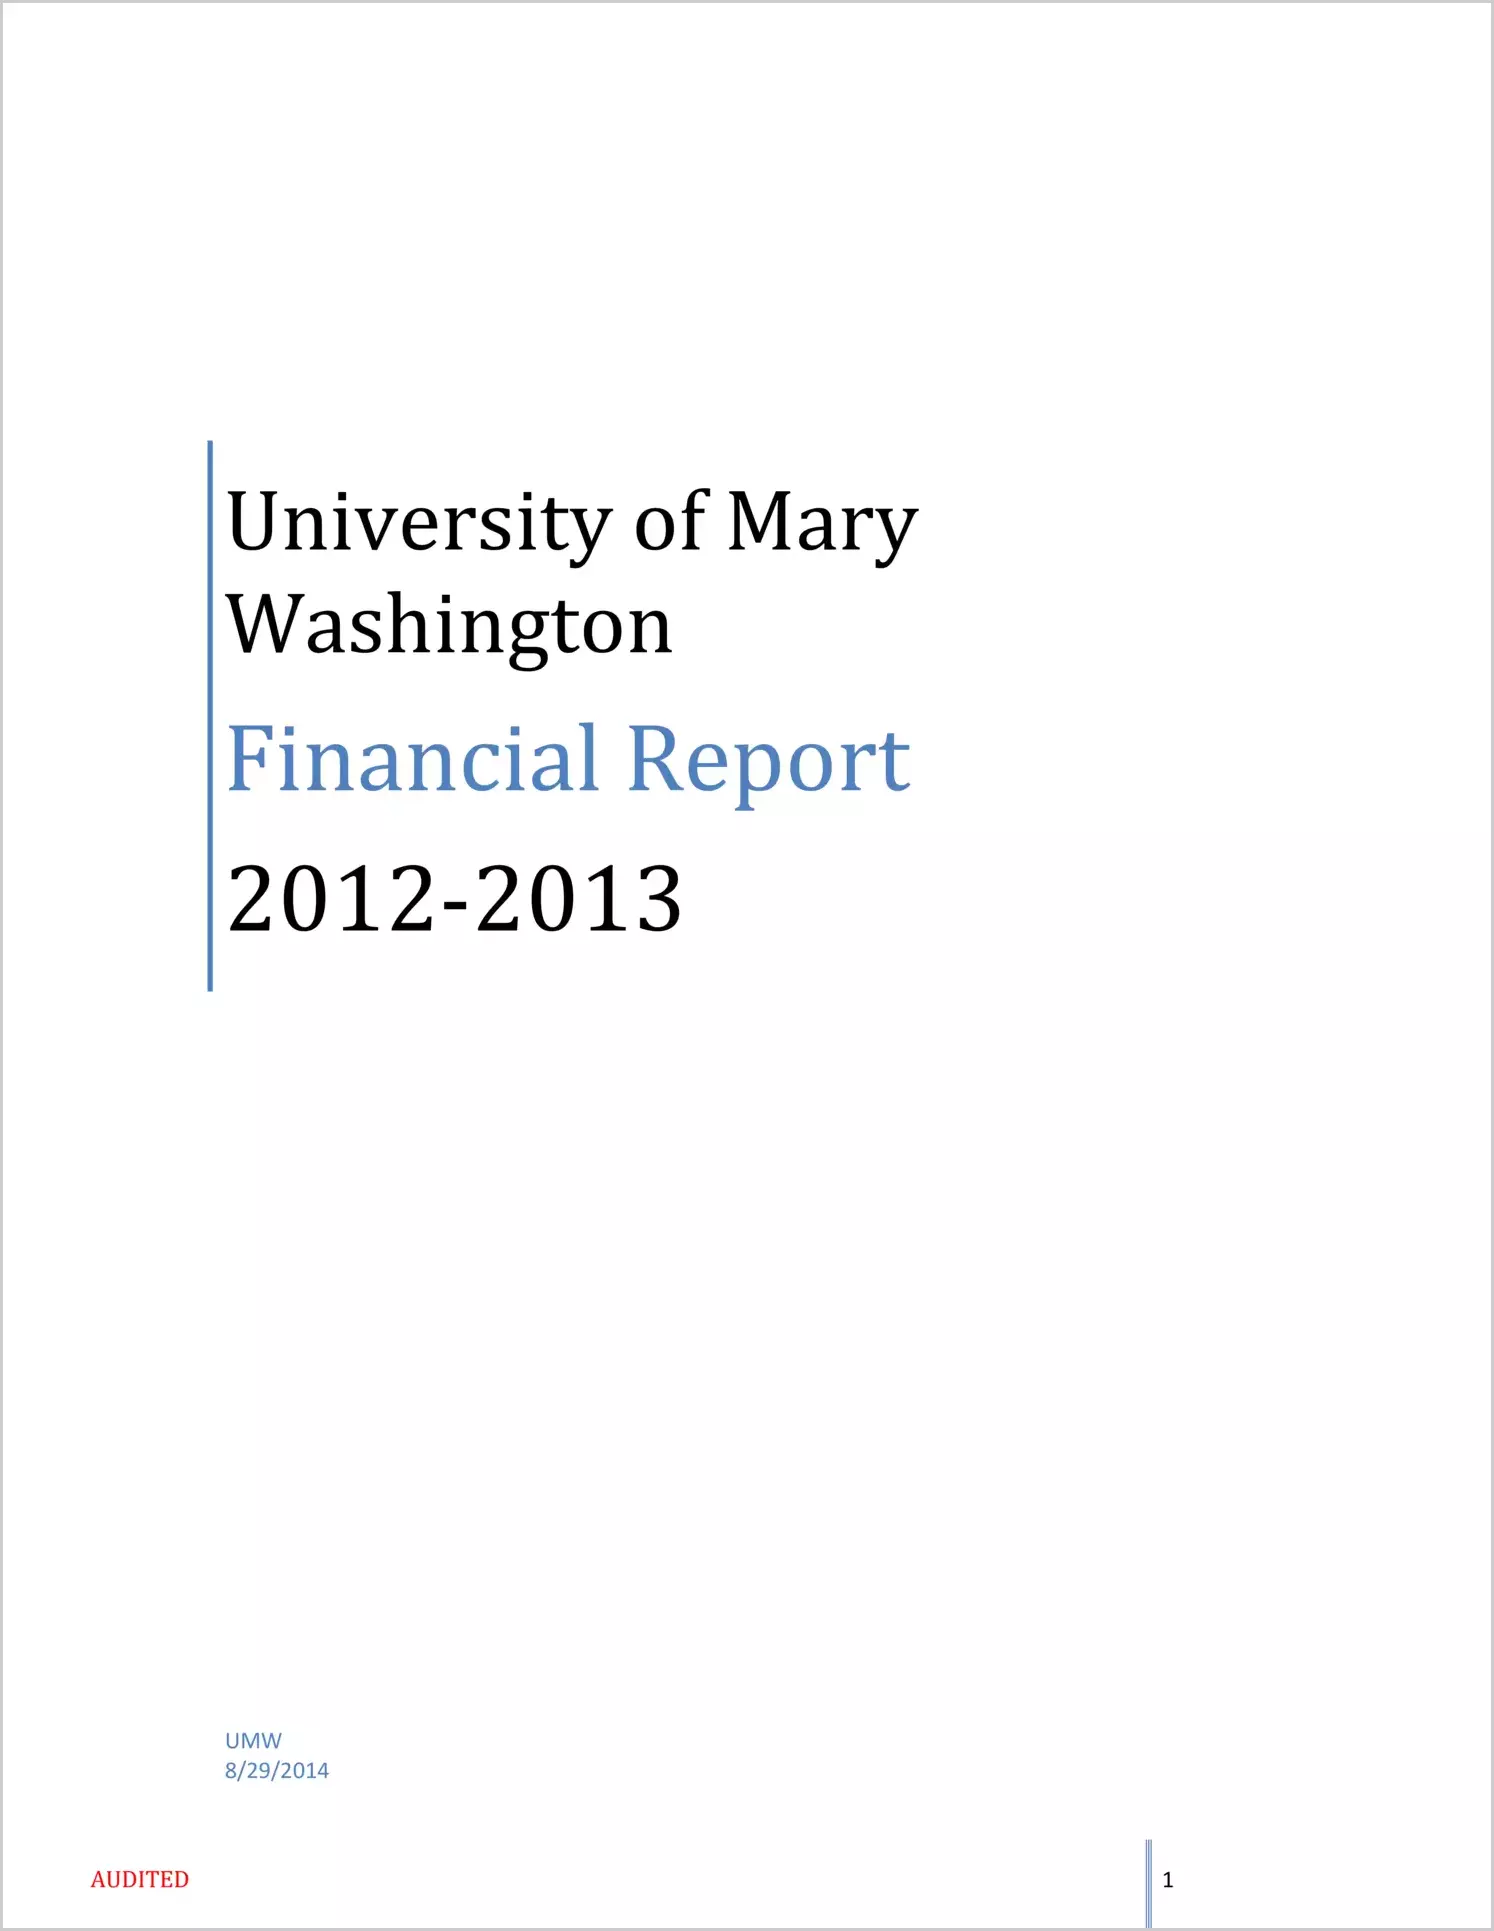 University of Mary Washington Financial Statement for the year ended June 30, 2013